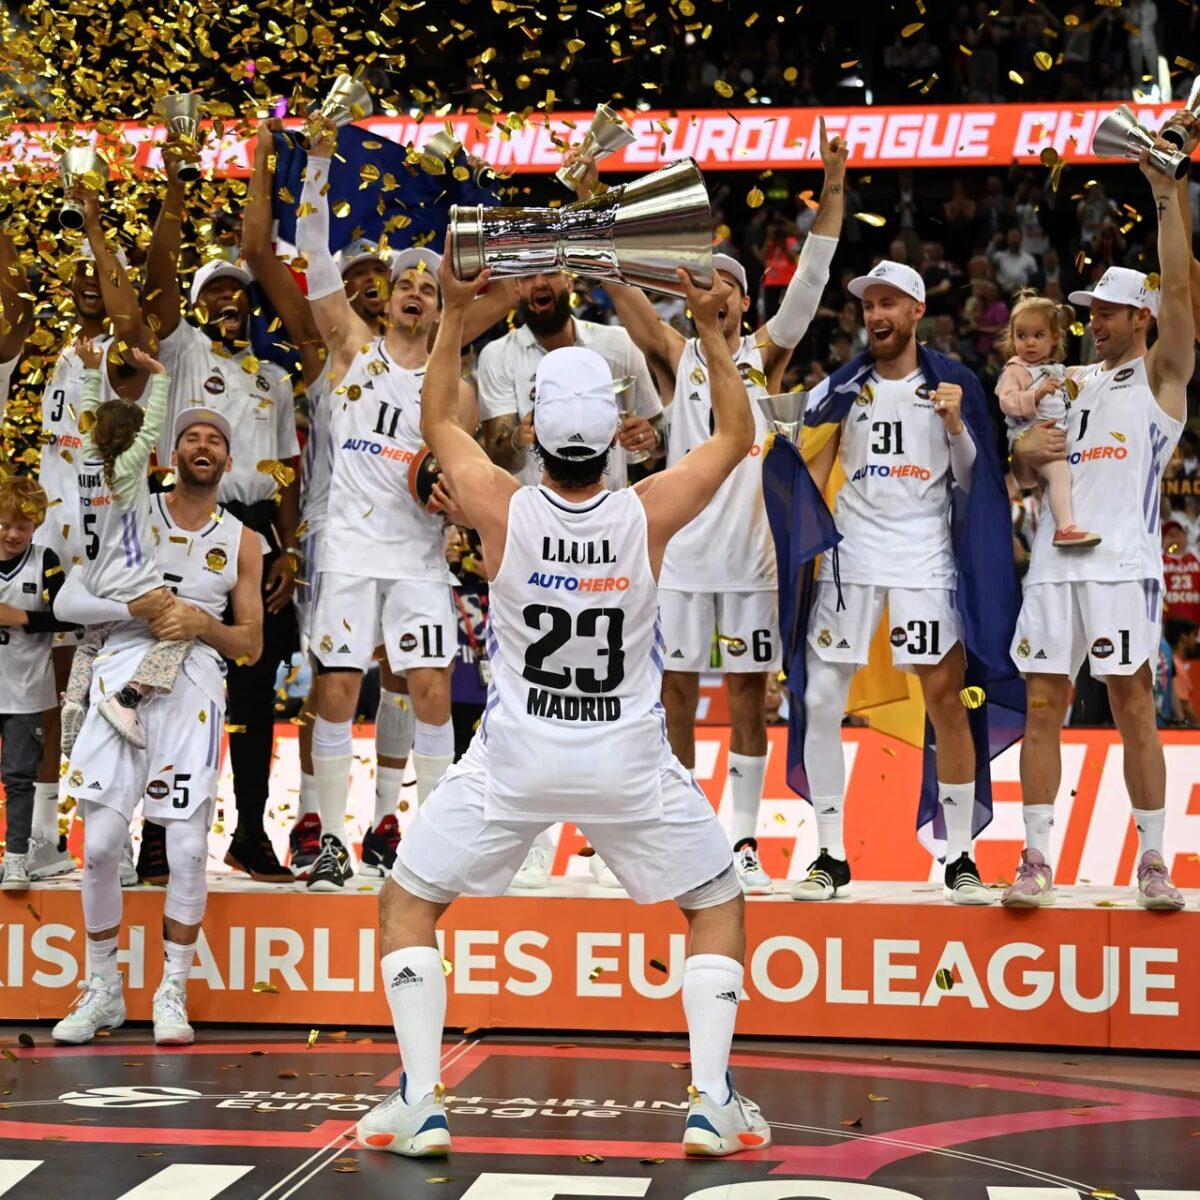 Real Madrid are the reigning champions but there are 17 teams chasing them down in the battle for the Euroleague Basketball title.